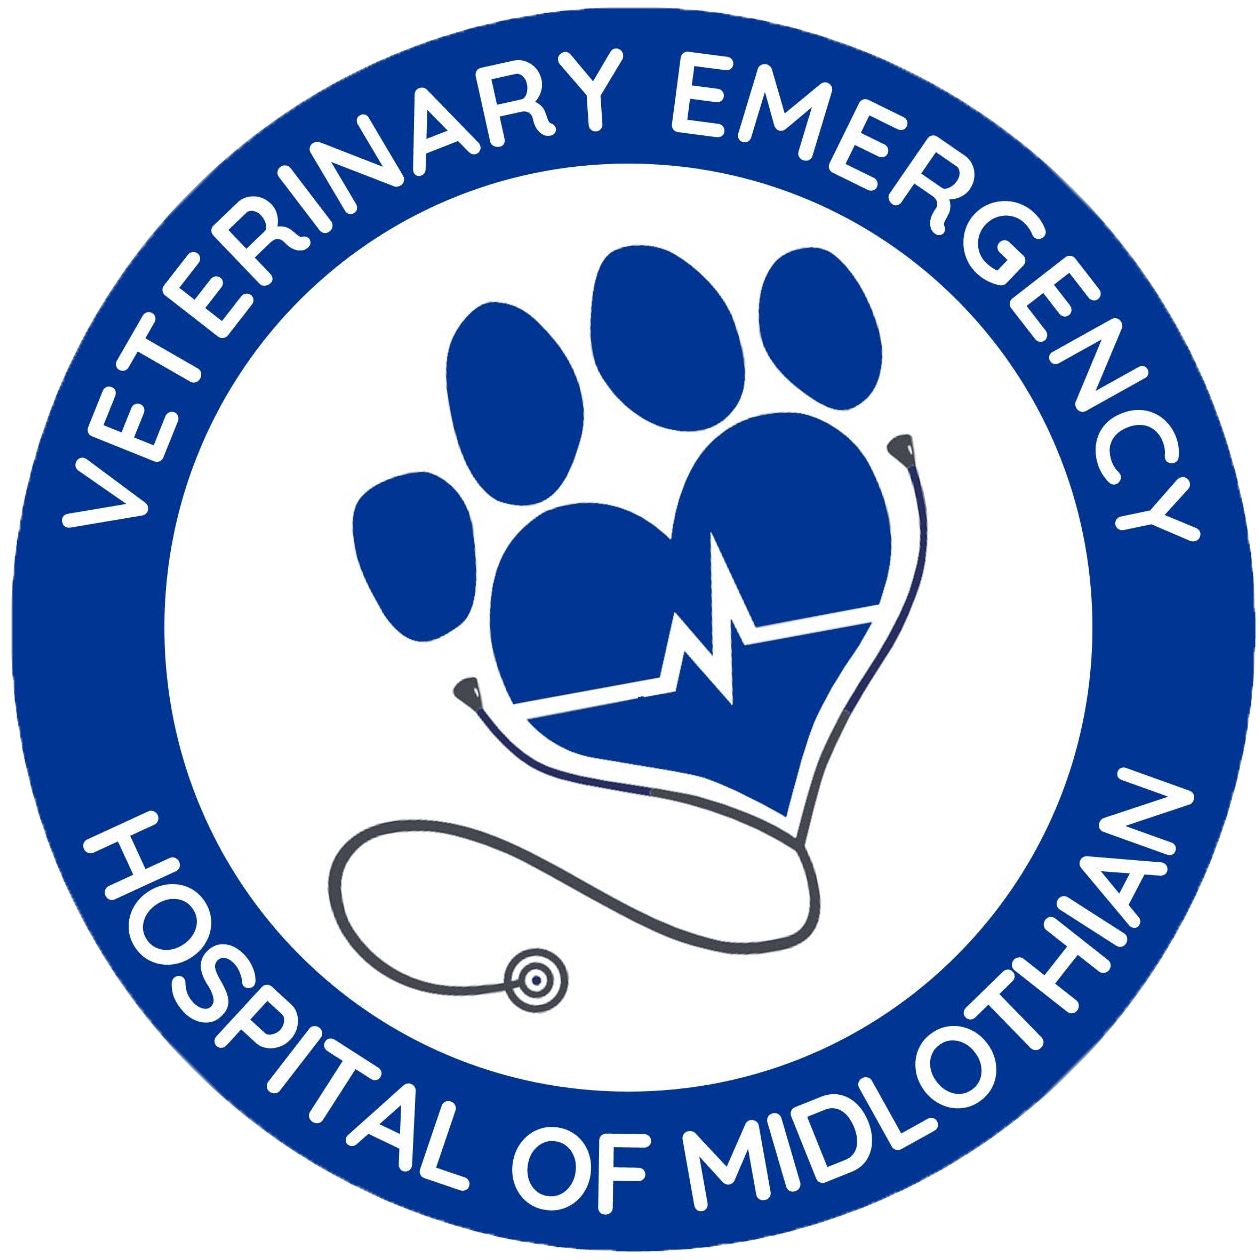 Emergency Veterinarian in Midlothian, TX | Contact Us for Quality Care!